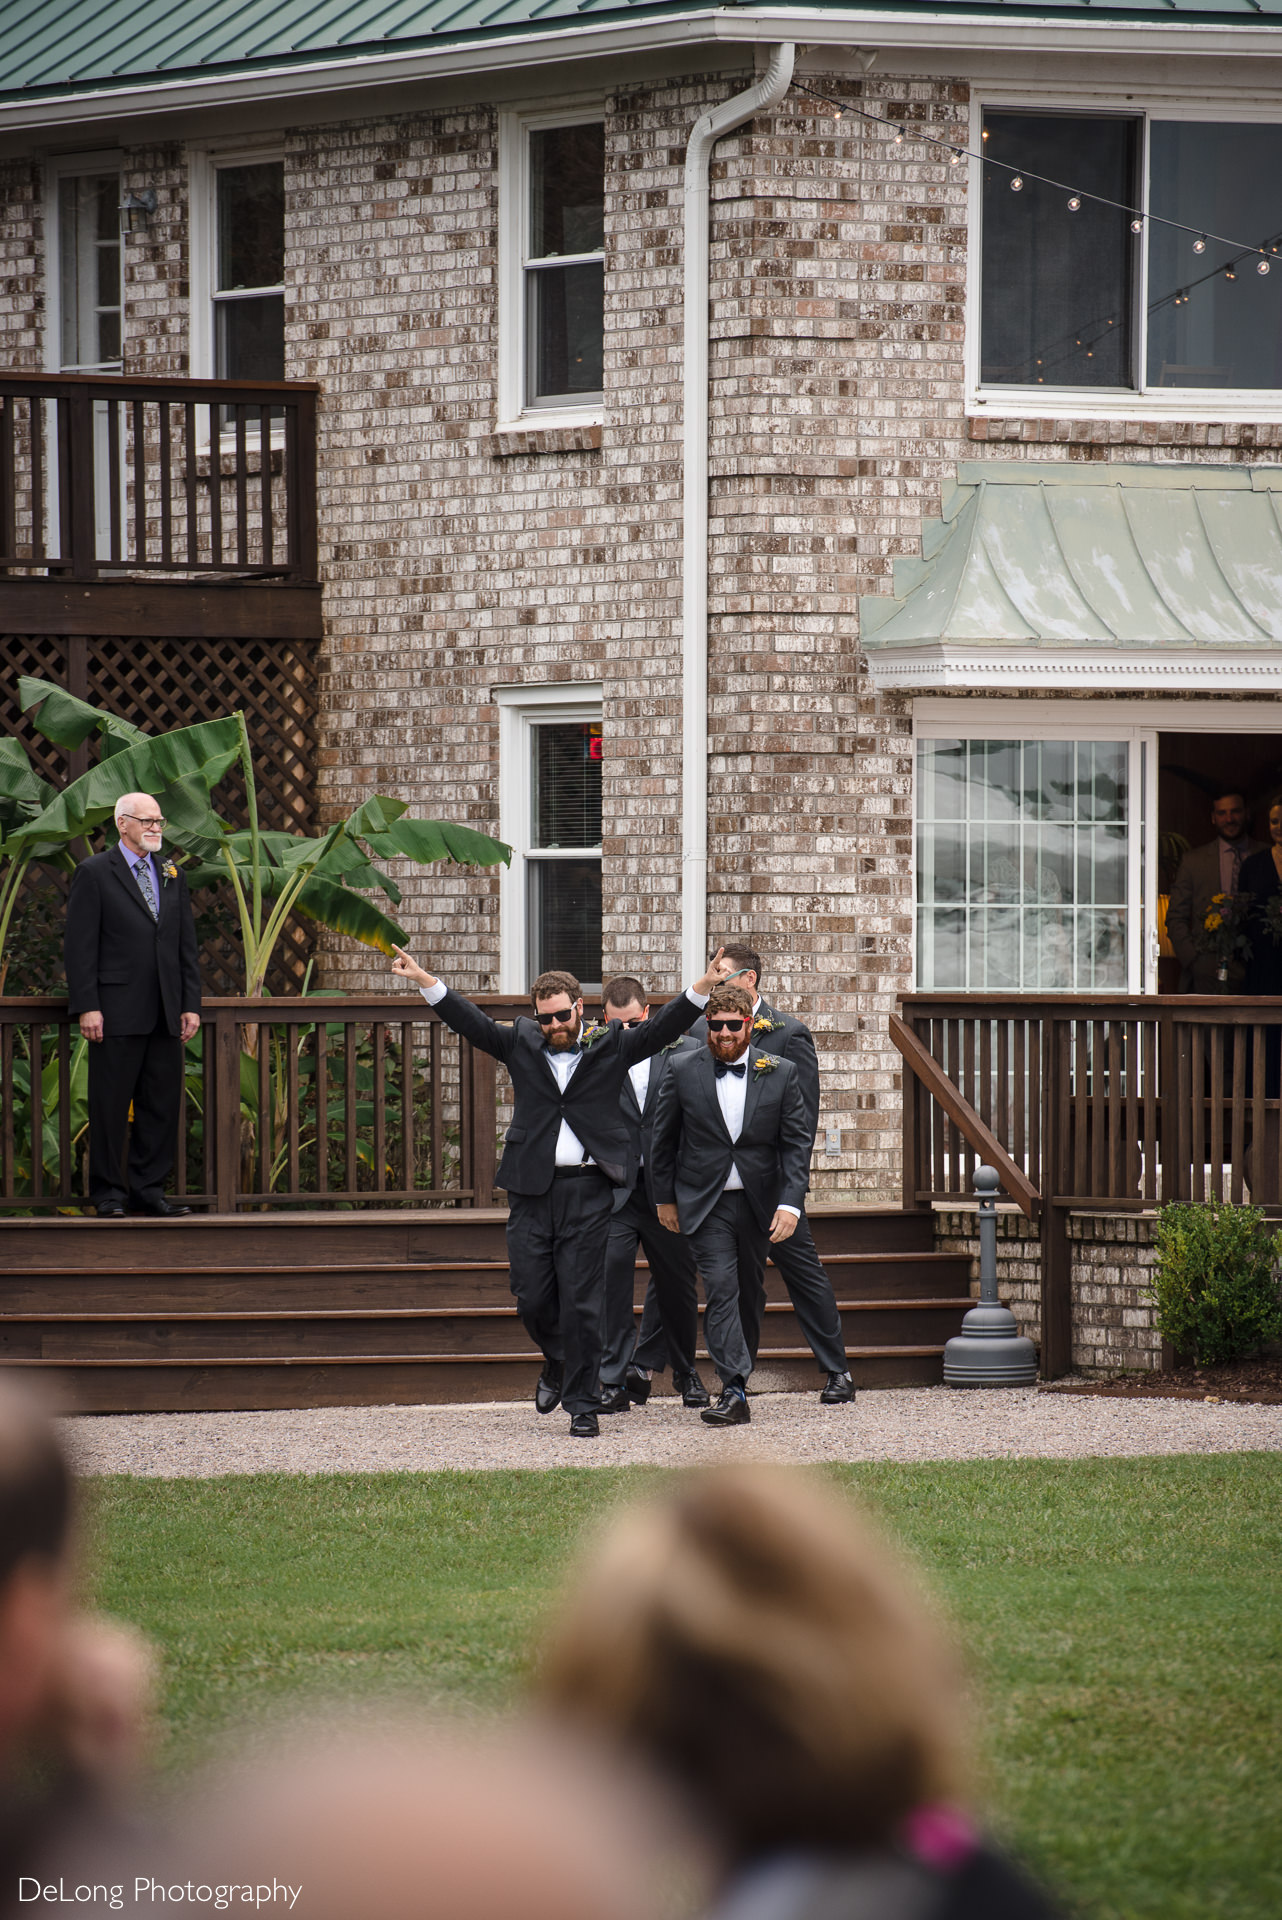 Groom and groomsmen doing a funny ceremony entrance by walking out wearing sunglasses at the Island House in Charleston, SC by Charlotte Wedding Photographers DeLong Photography